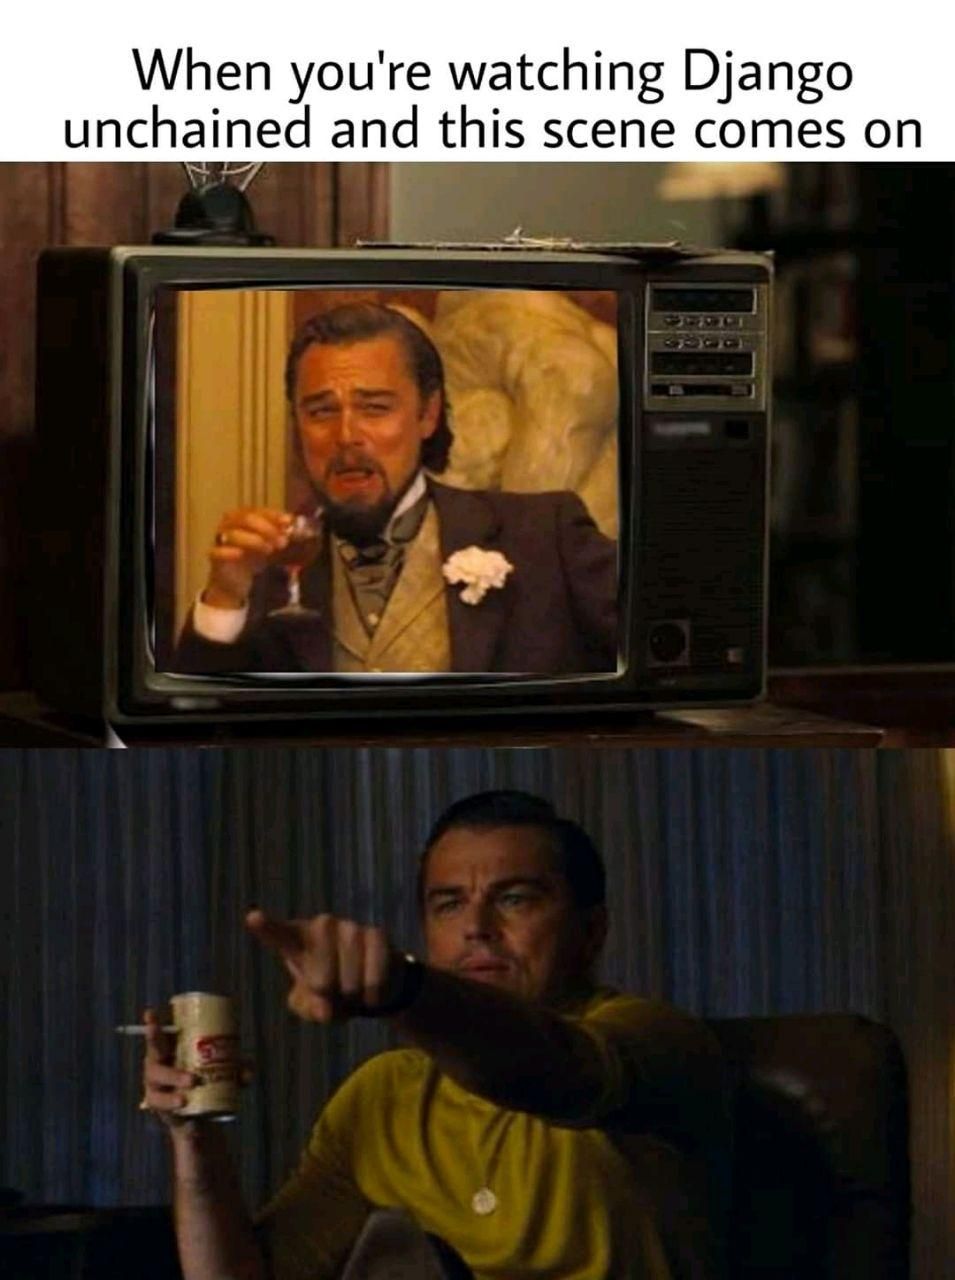 Leanrdo DiCaprio Django Once Upon a Time in Hollywood mashup meme